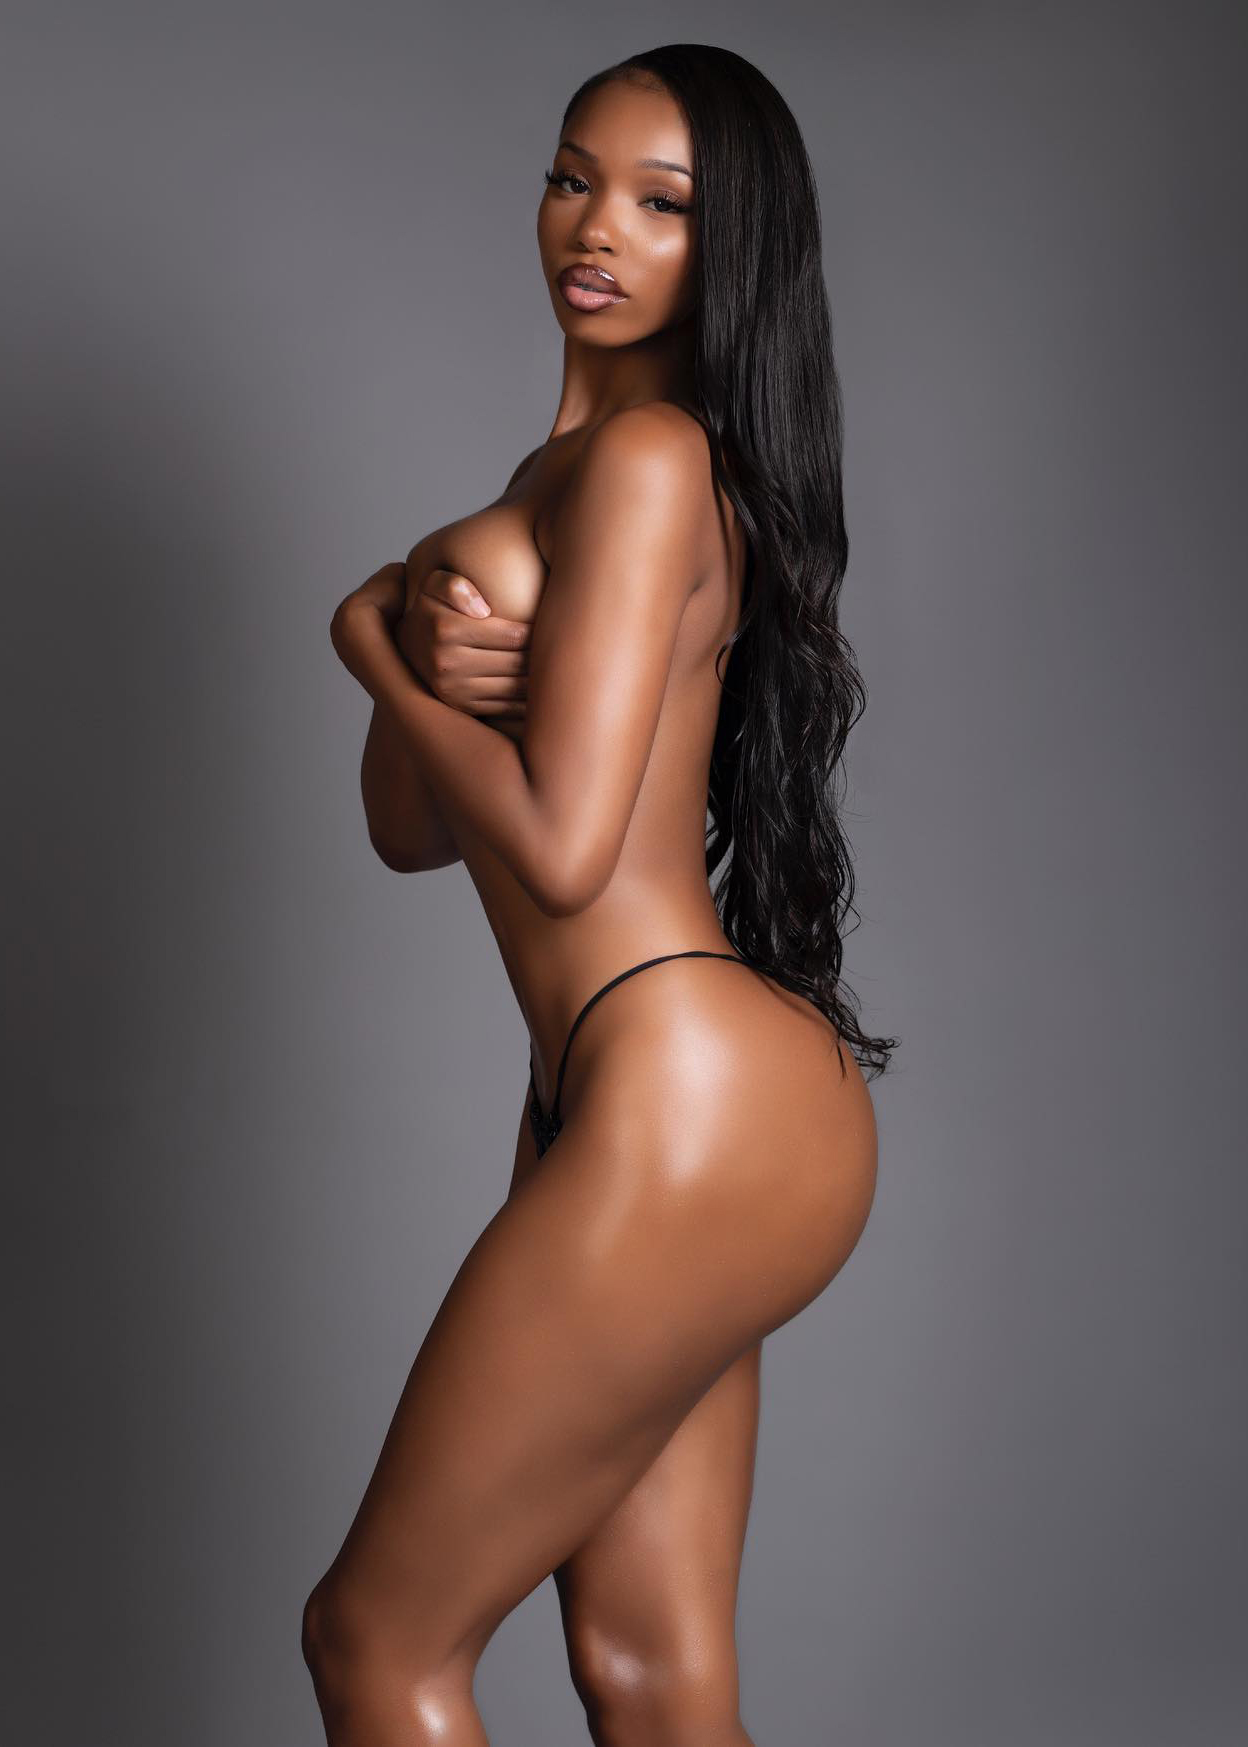 Asia amour nude